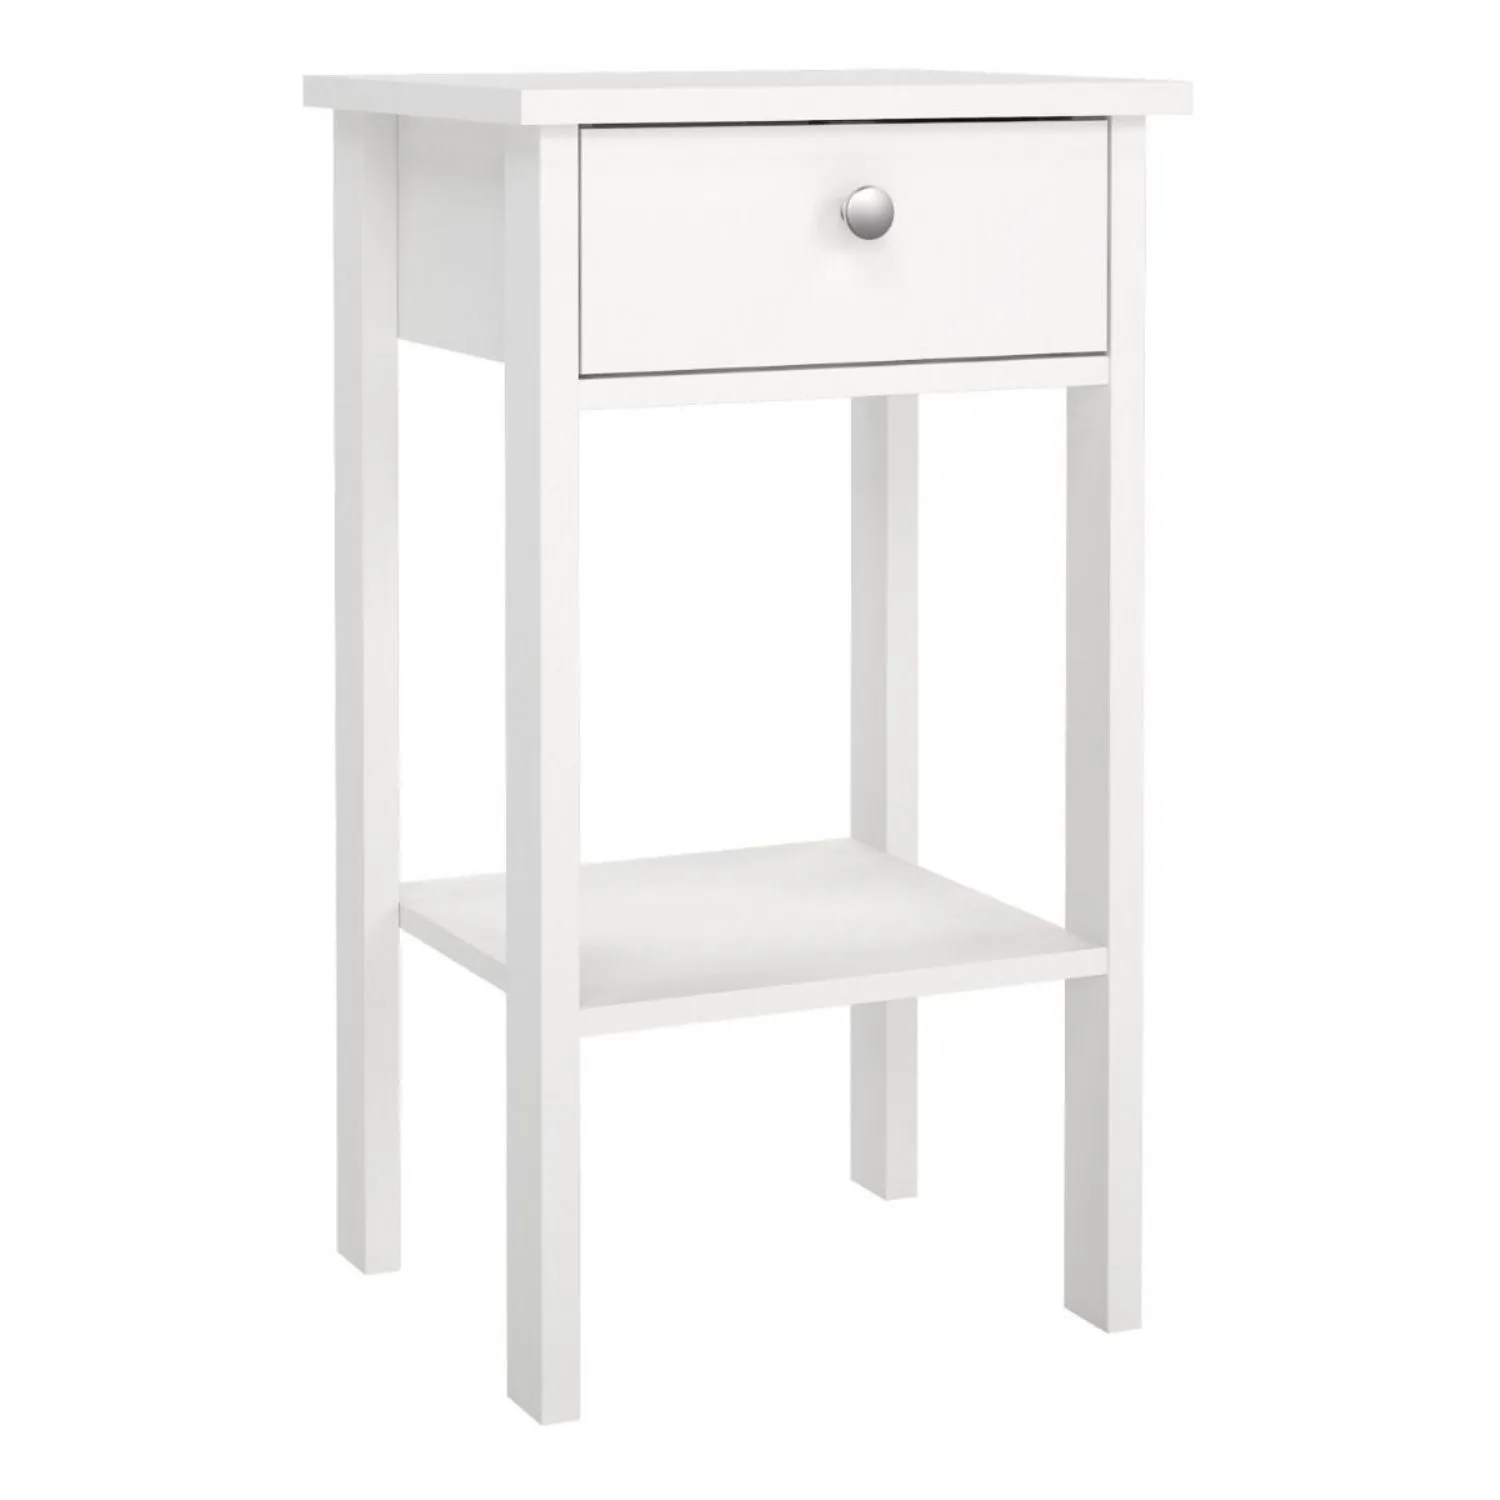 Madrid Bedside Table with 1 Drawer in White